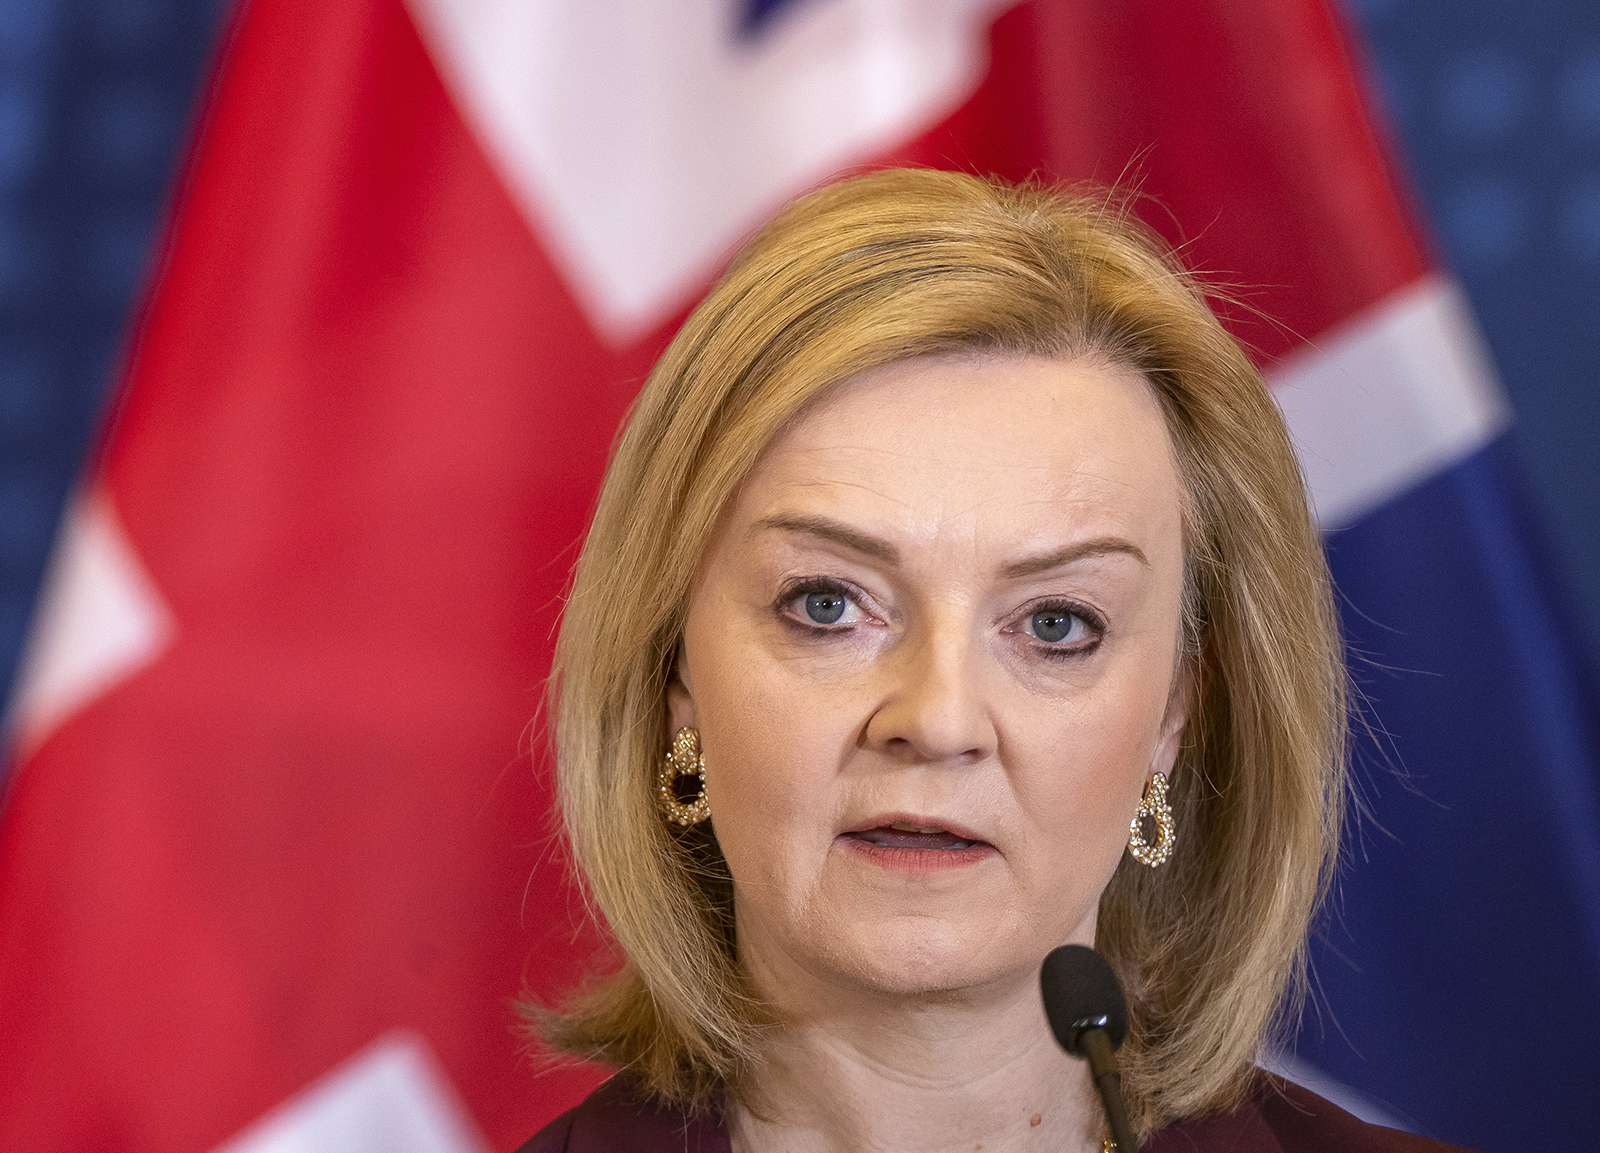 Britain's Foreign Secretary Liz Truss speaks during a joint news conference with her counterparts from Lithuania, Latvia and Estonia at the Ministry of Foreign Affairs in Vilnius, Lithuania, on March 3.